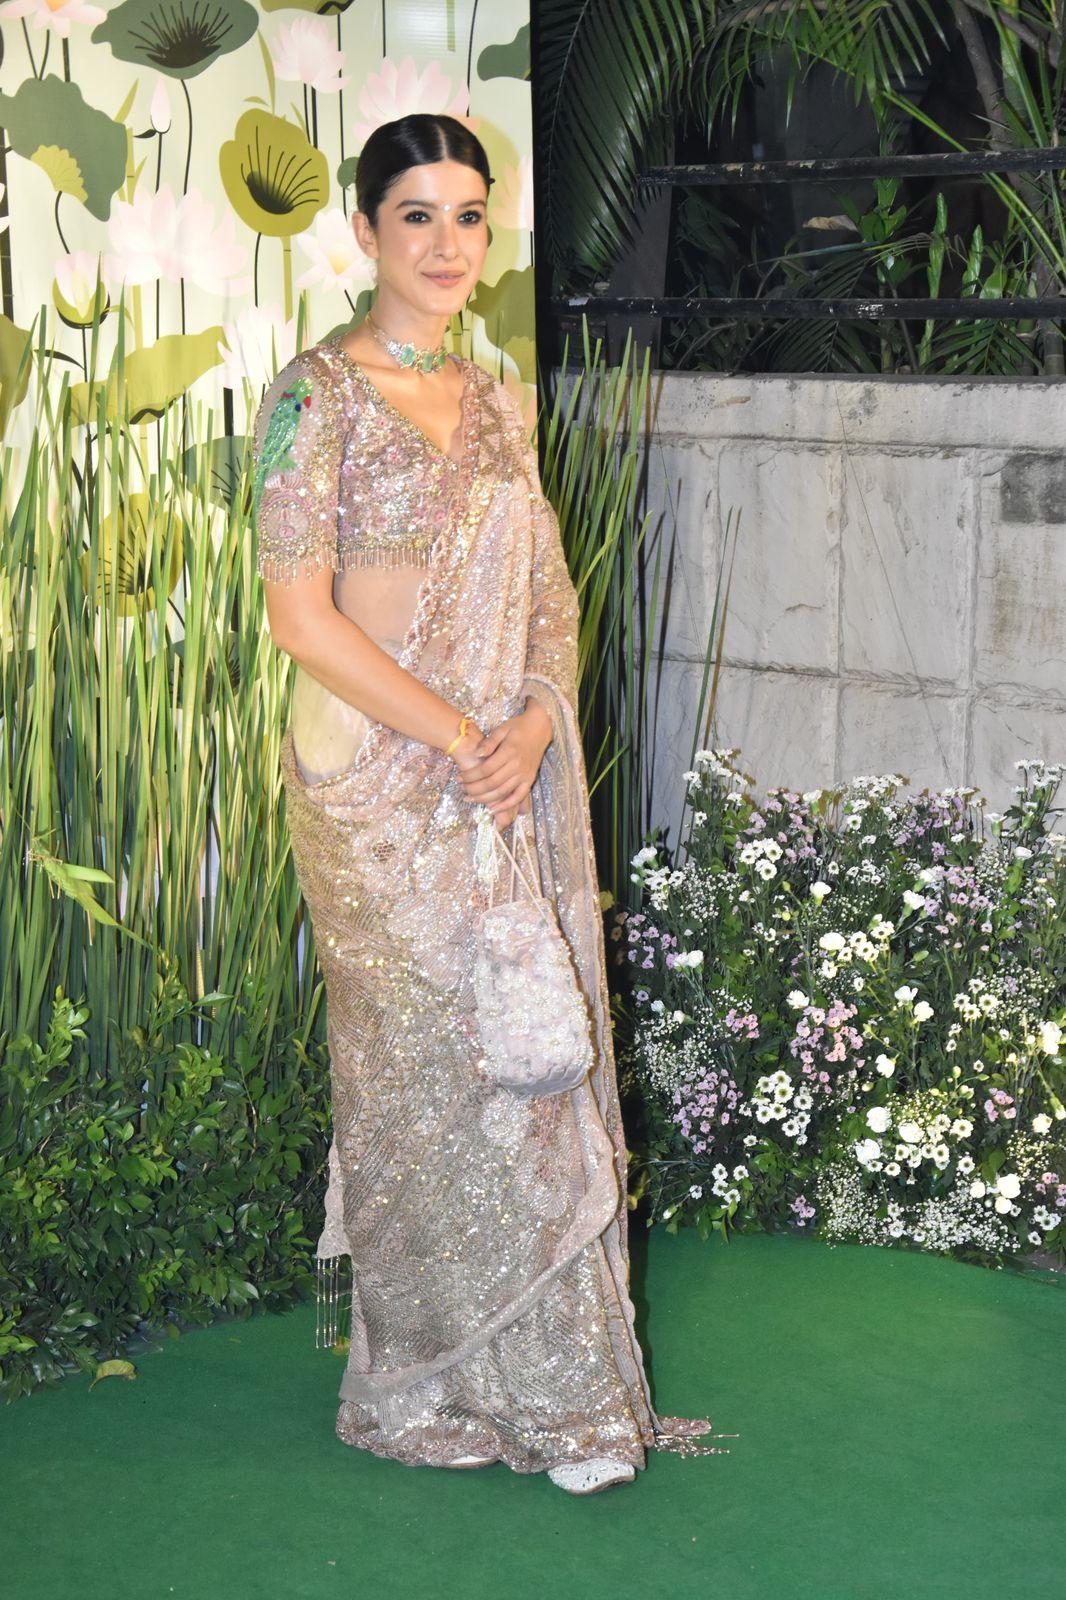 Shanaya Kapoor arrived looking angelic in this cream saree with beautiful embellishments